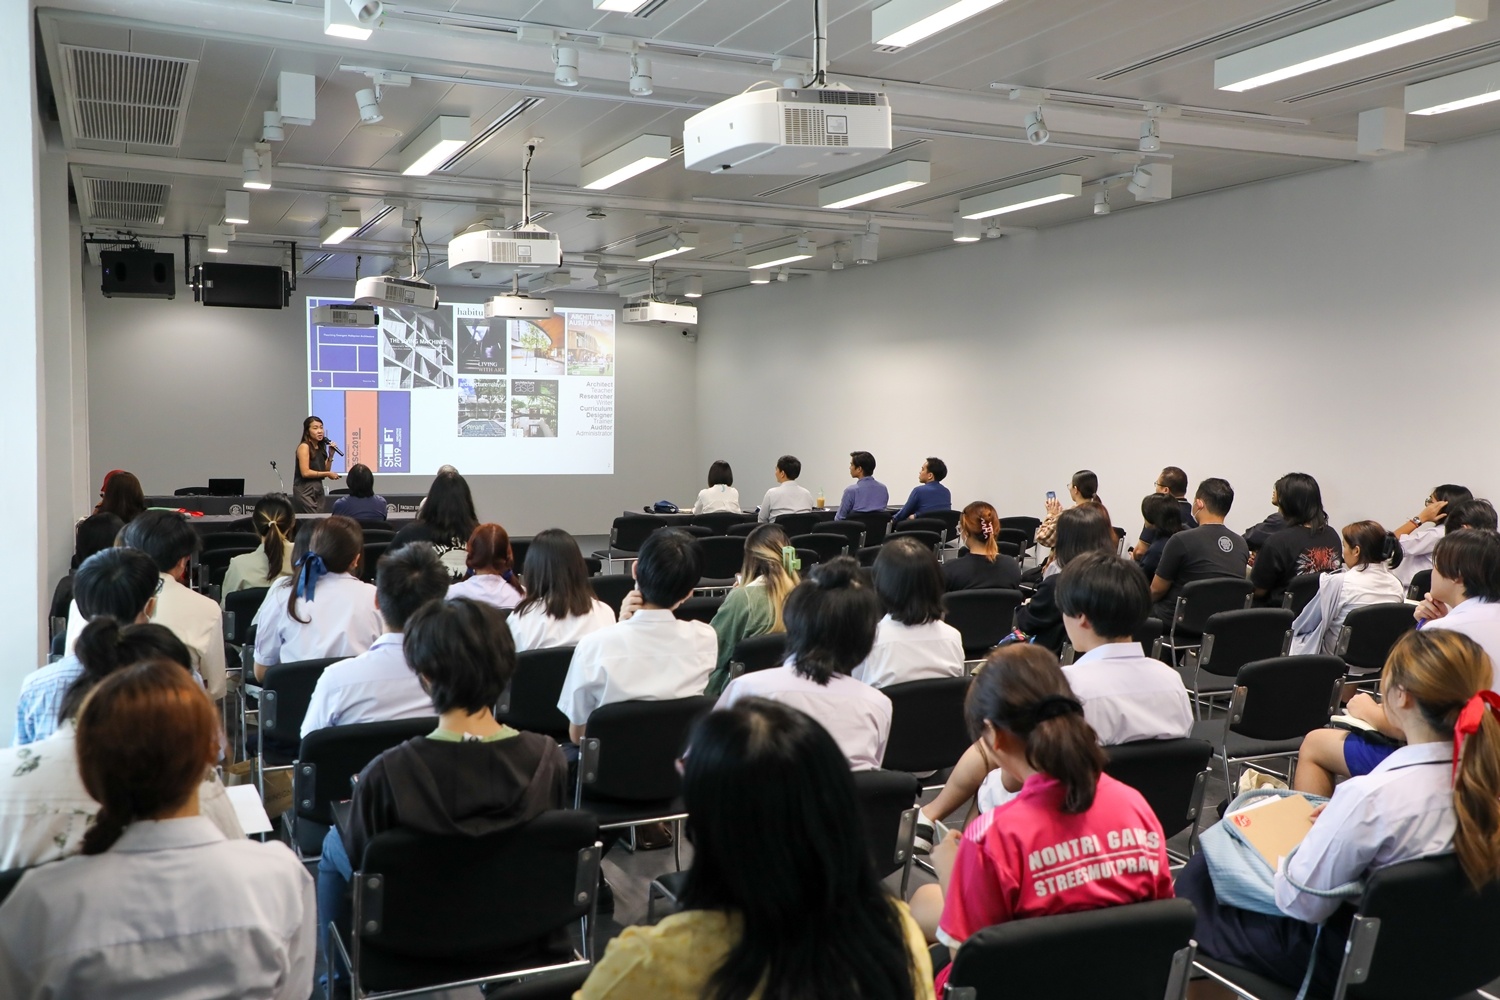 Public Lecture: Book Project: Kedah, A History in Drawings and My Bamboo Placemaking in Neighborhood Urban Farms by Associate Professor Veronica Ng, Taylor's University, Malaysia